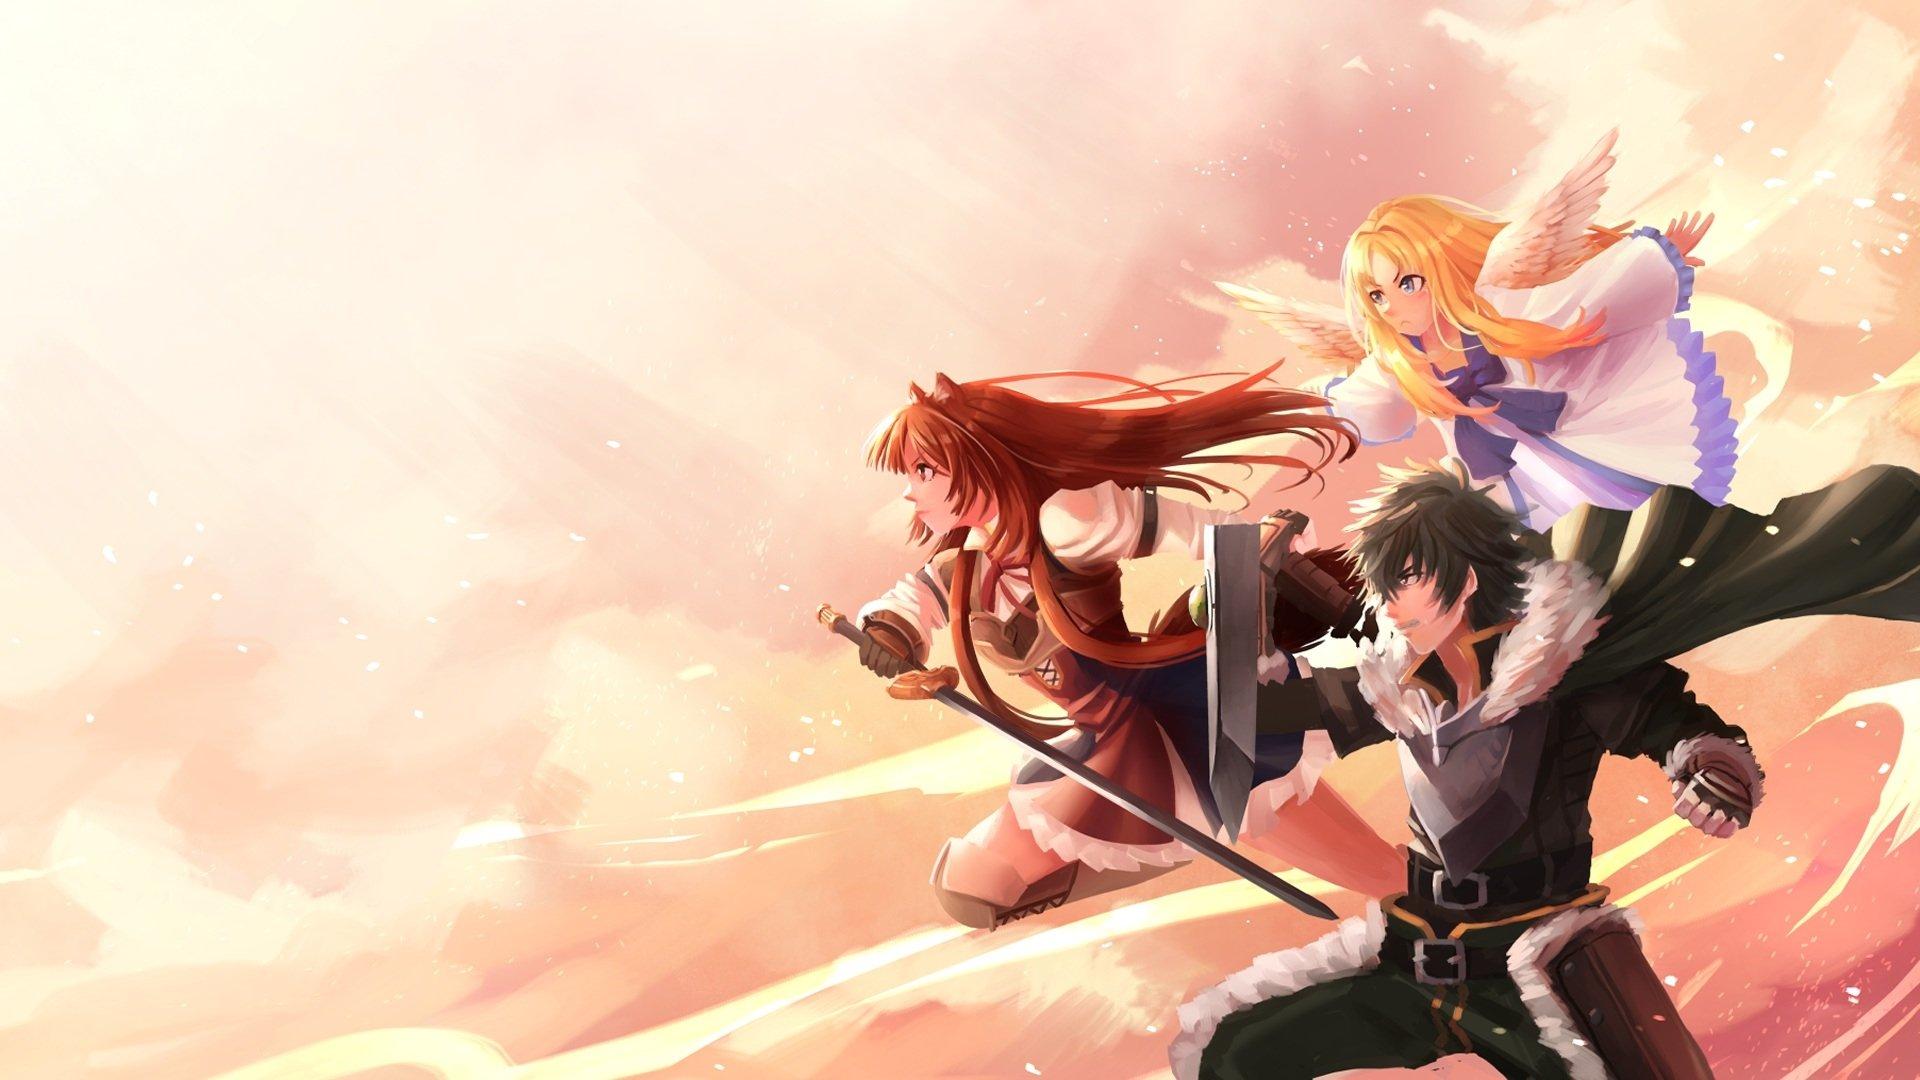 The Rising of the Shield Hero HD Wallpaper. Background